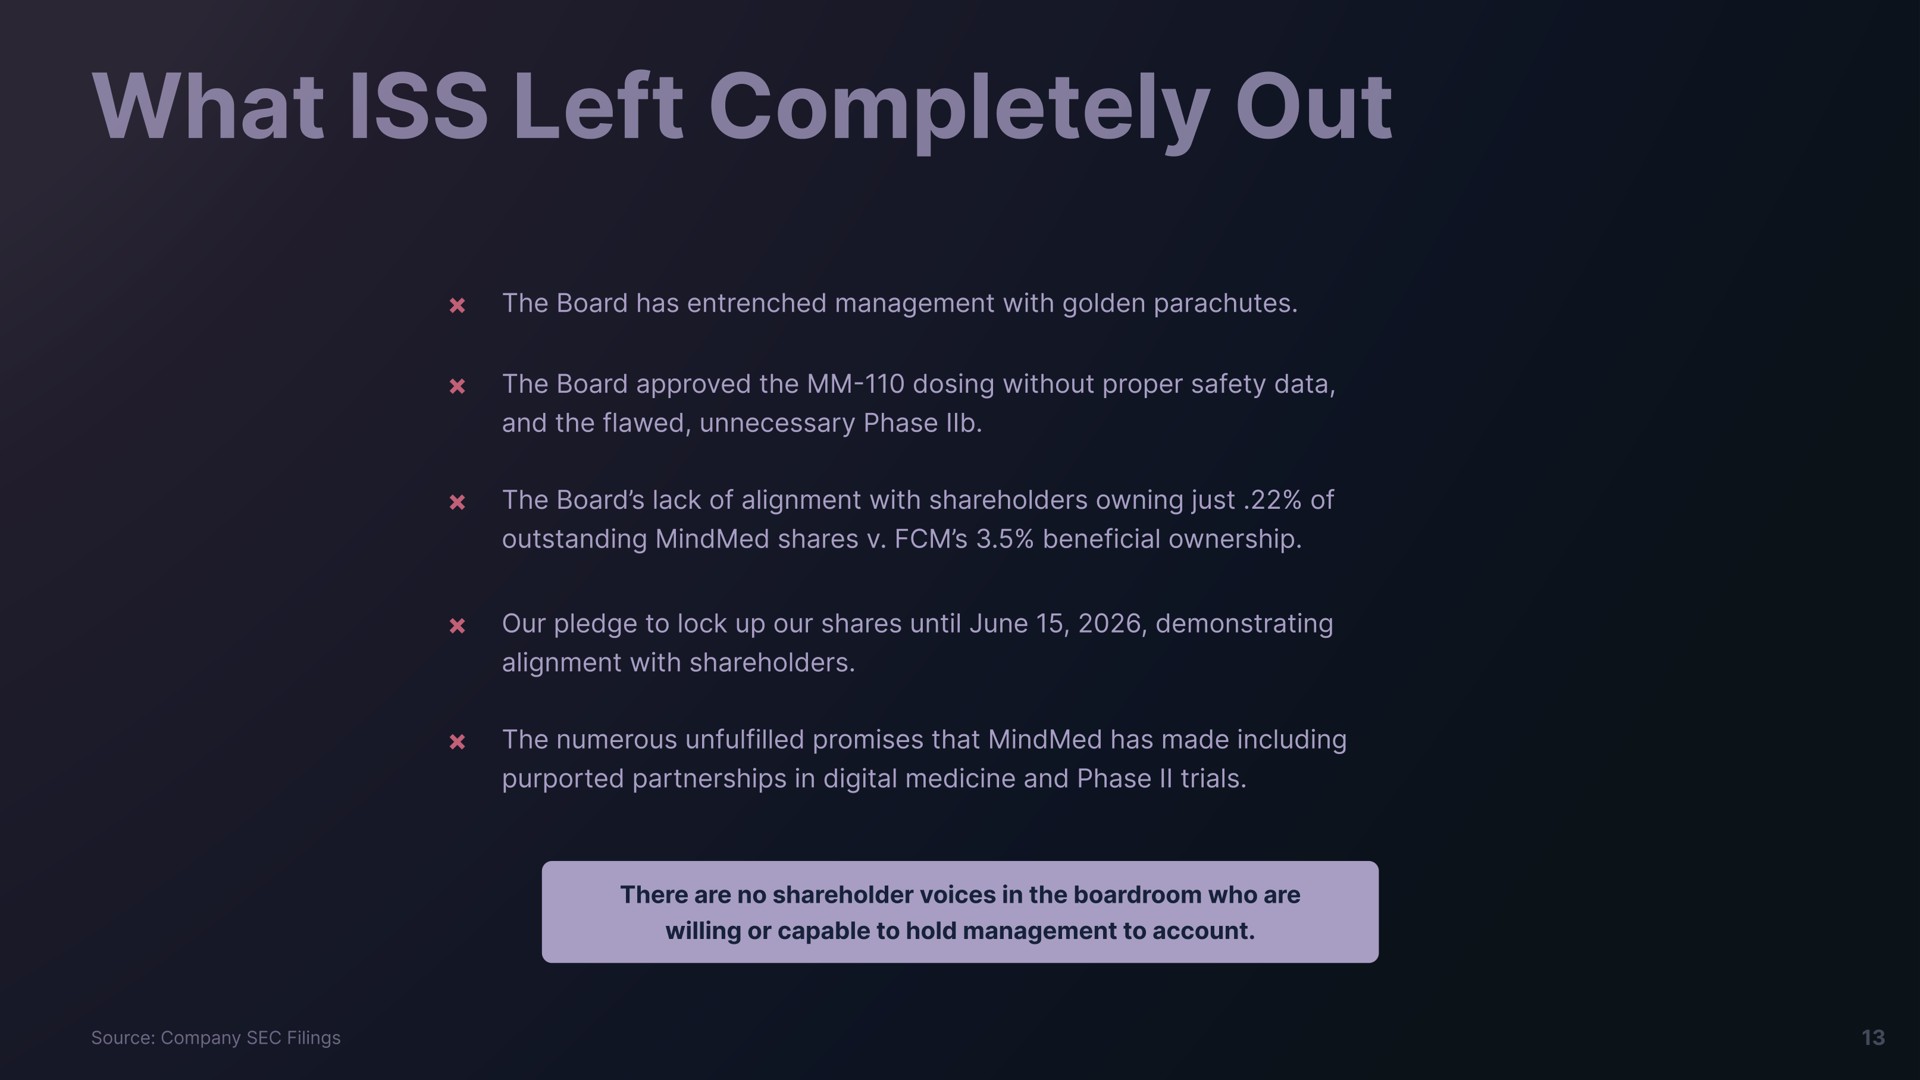 what iss left completely out | Freeman Capital Management